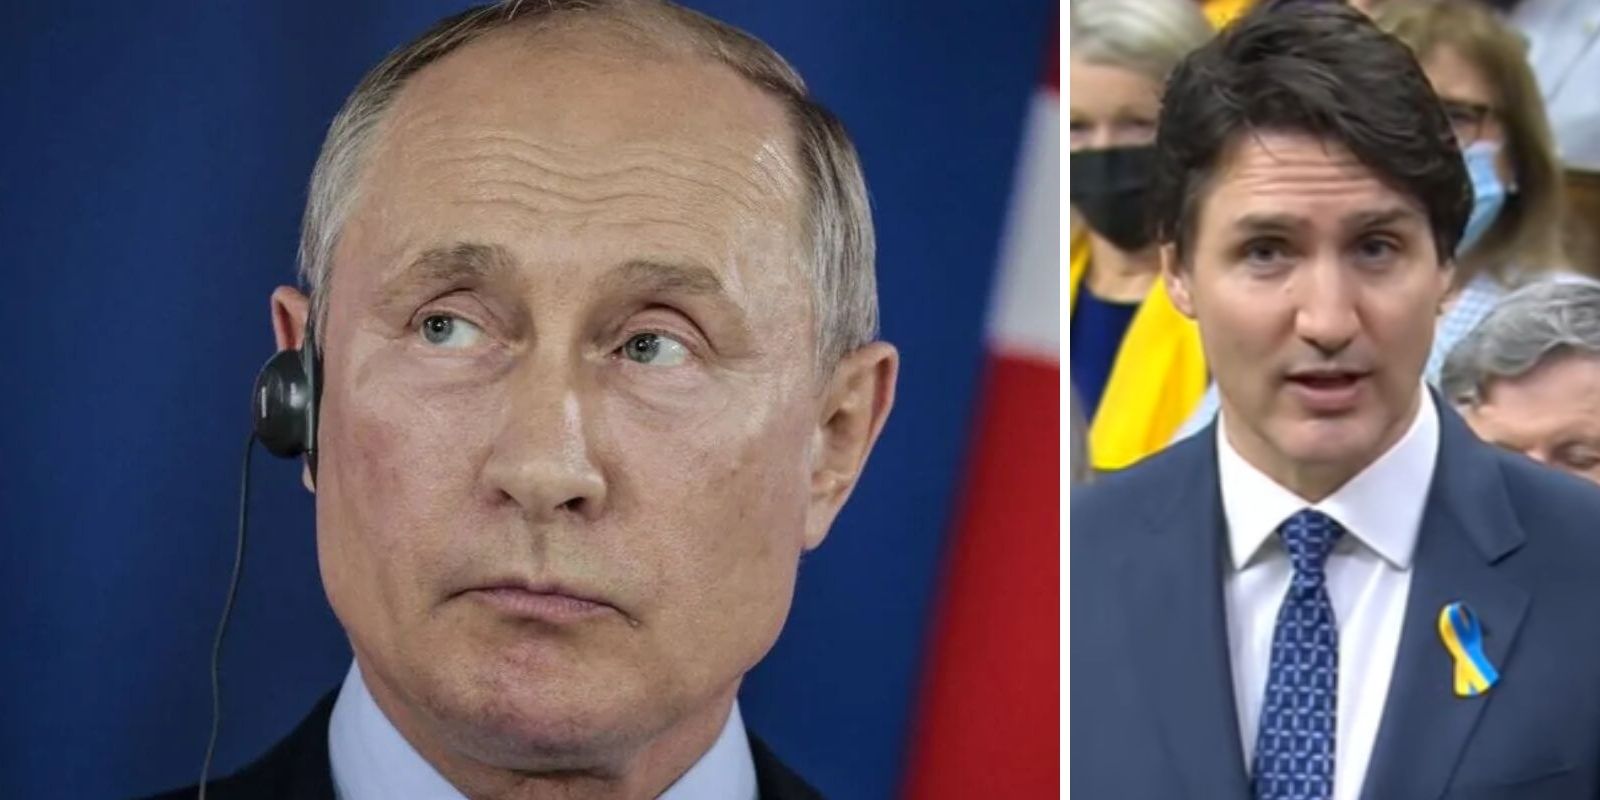 Russia bans entry to Prime Minister Trudeau